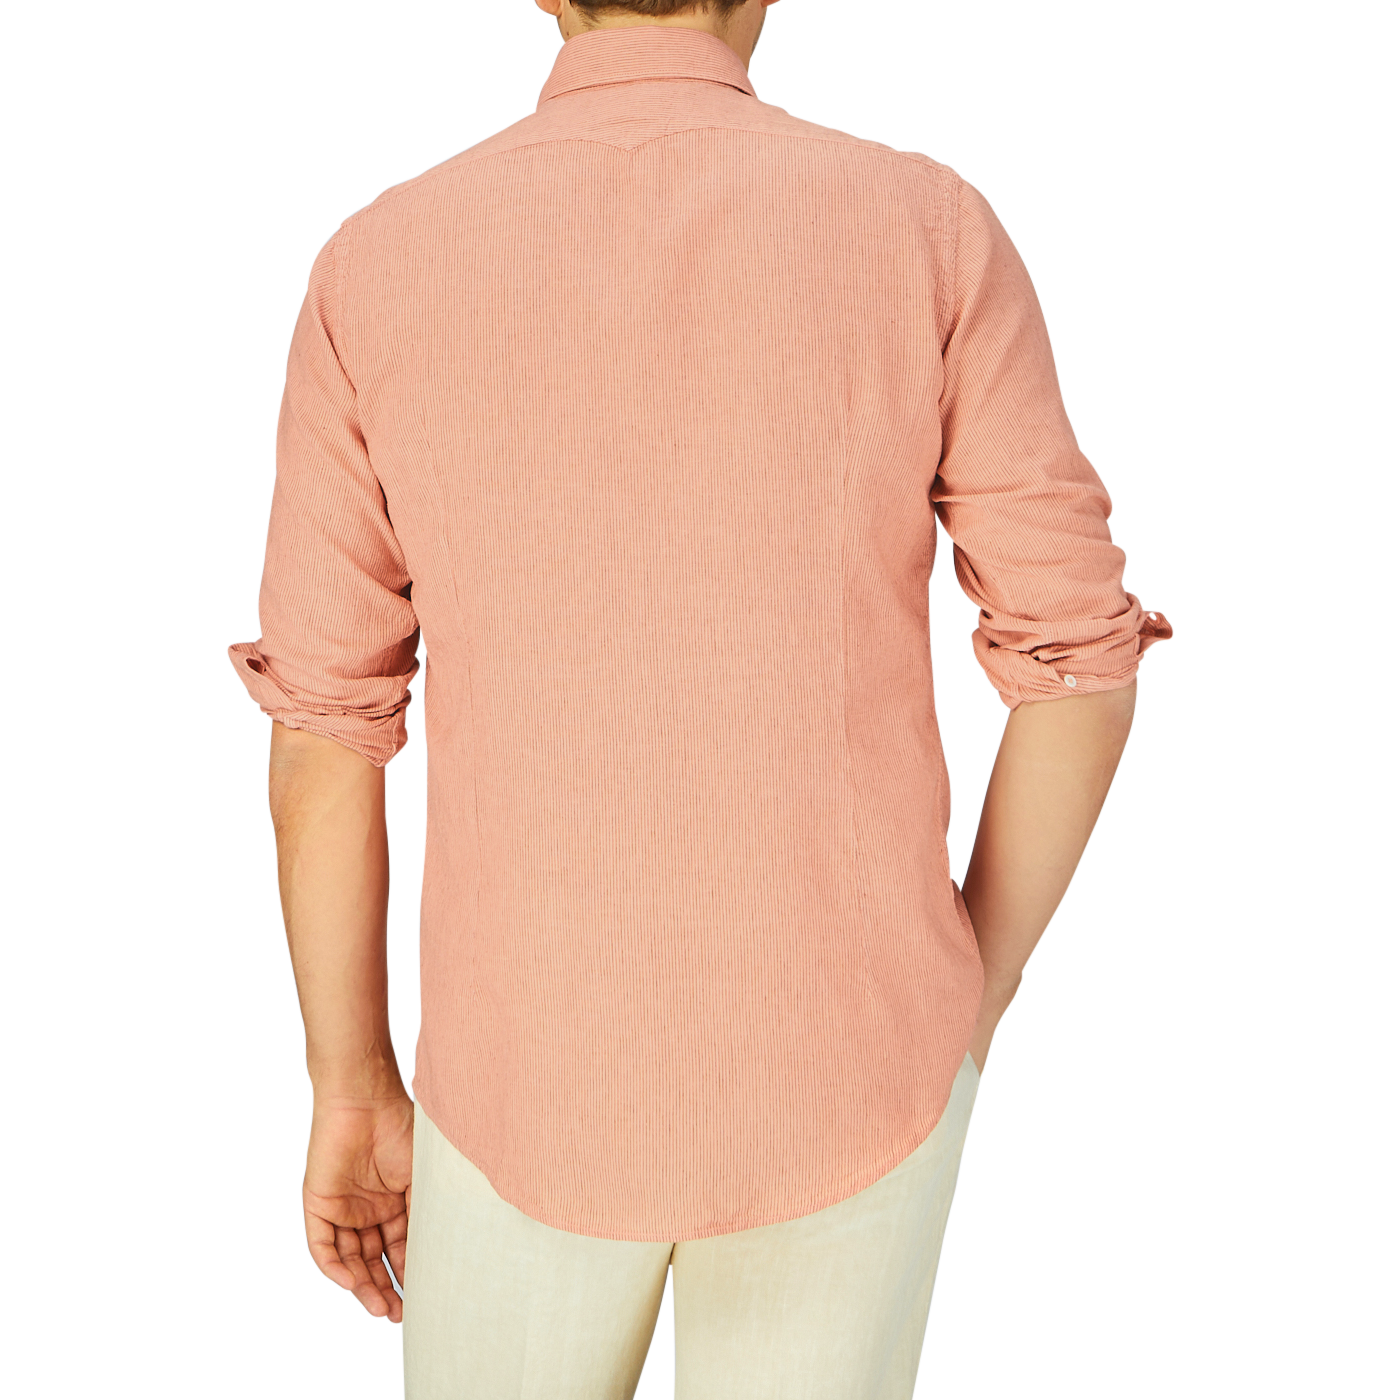 A person standing with their back to the camera, wearing a pink Massimo Alba Peach Orange Striped Cotton Linen Genova Shirt with rolled-up sleeves.